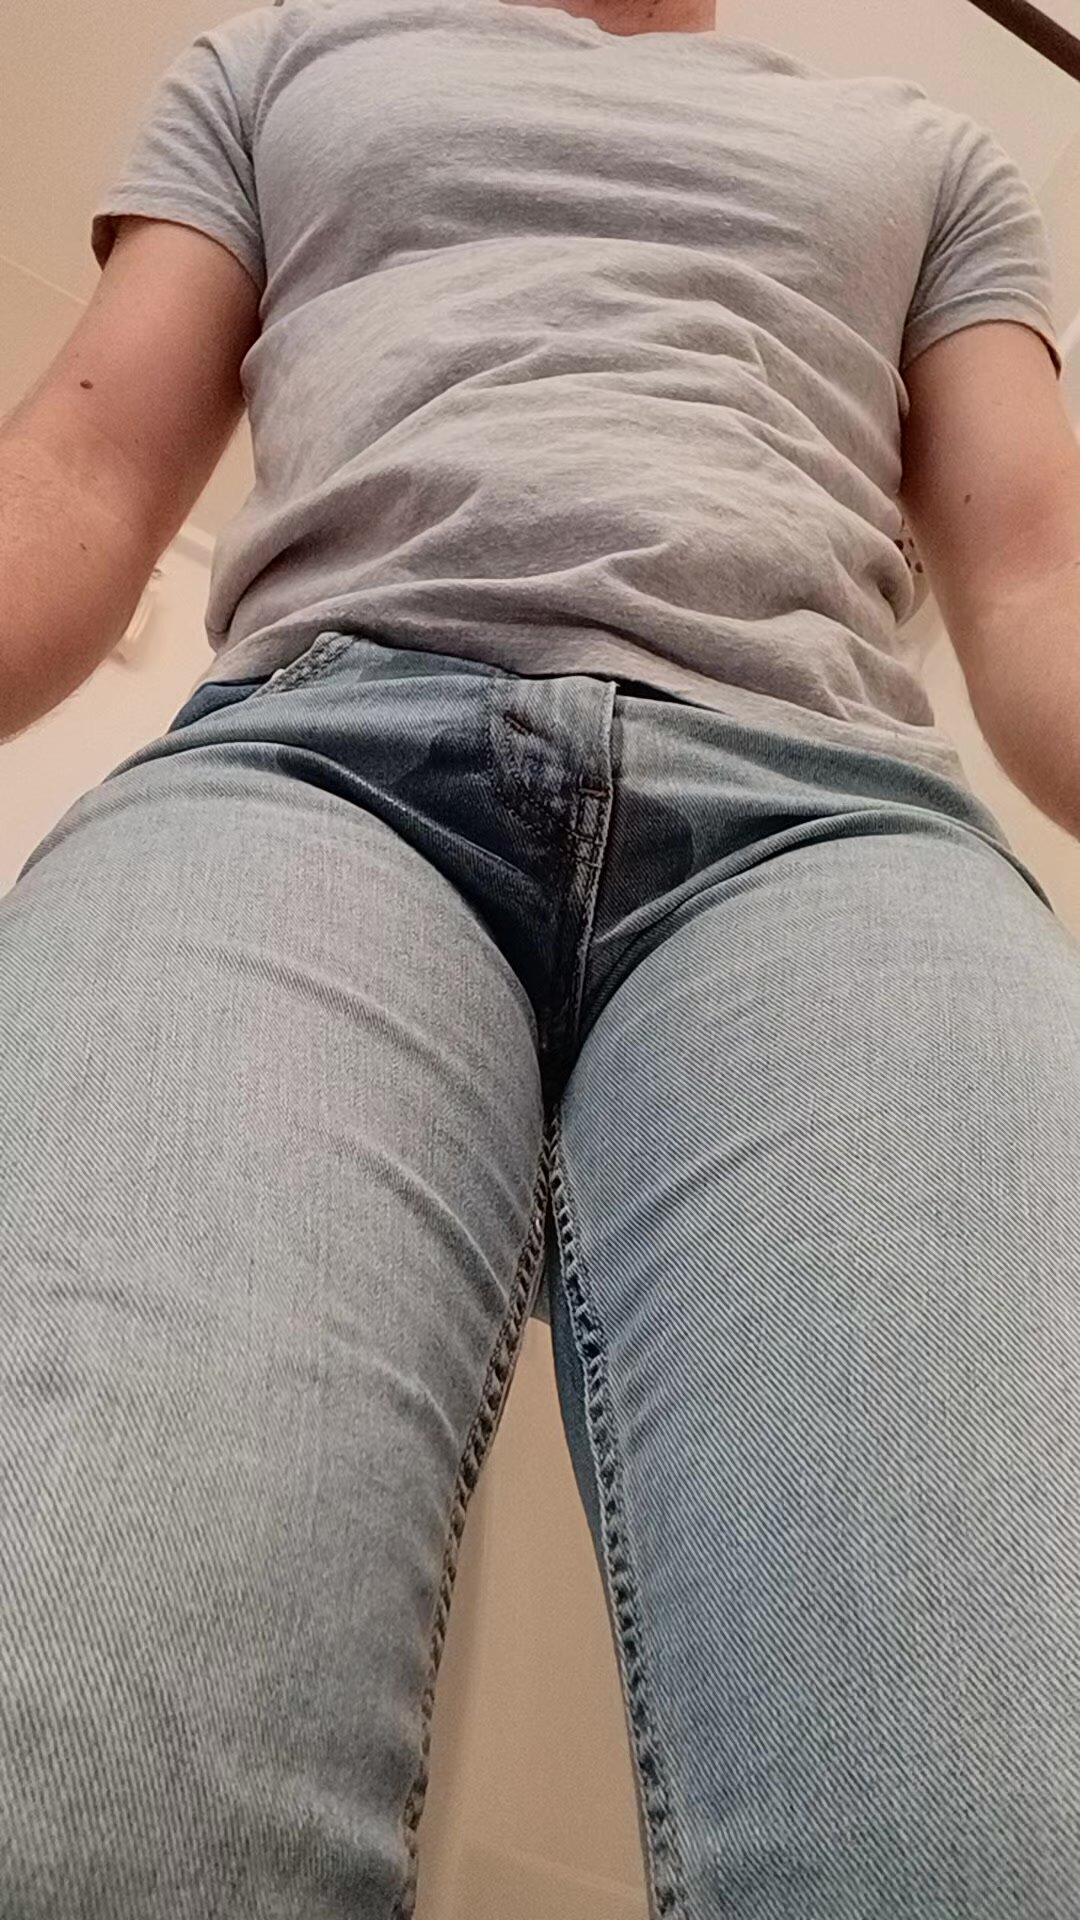 Jeans piss - video 29